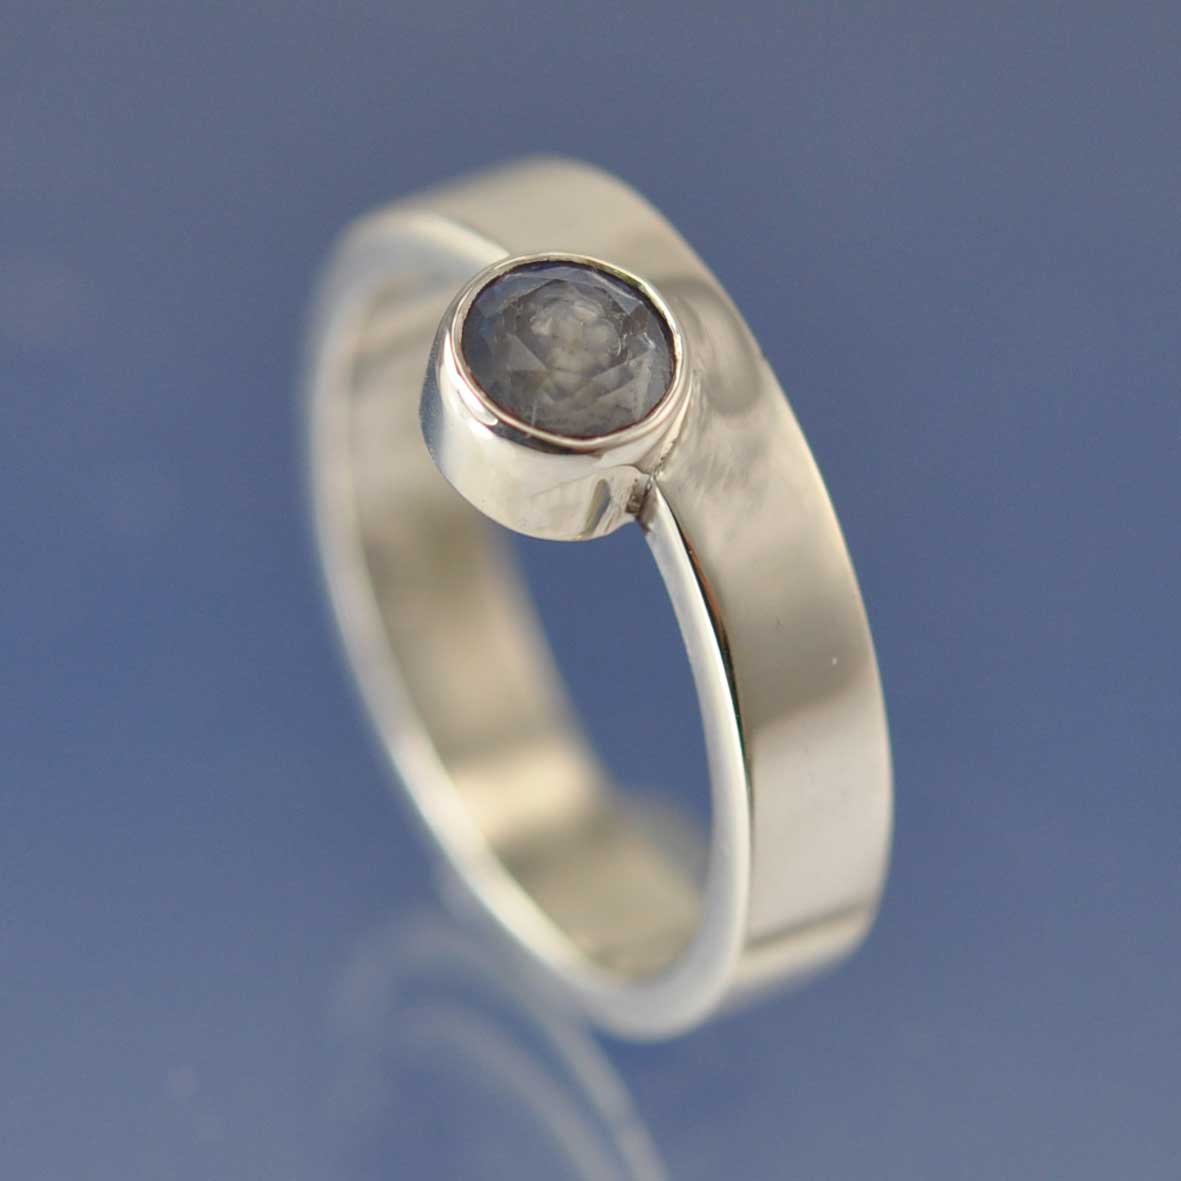 Cremation Ash in Gemstones - Sunrise Ring by Chris Parry Jewellery